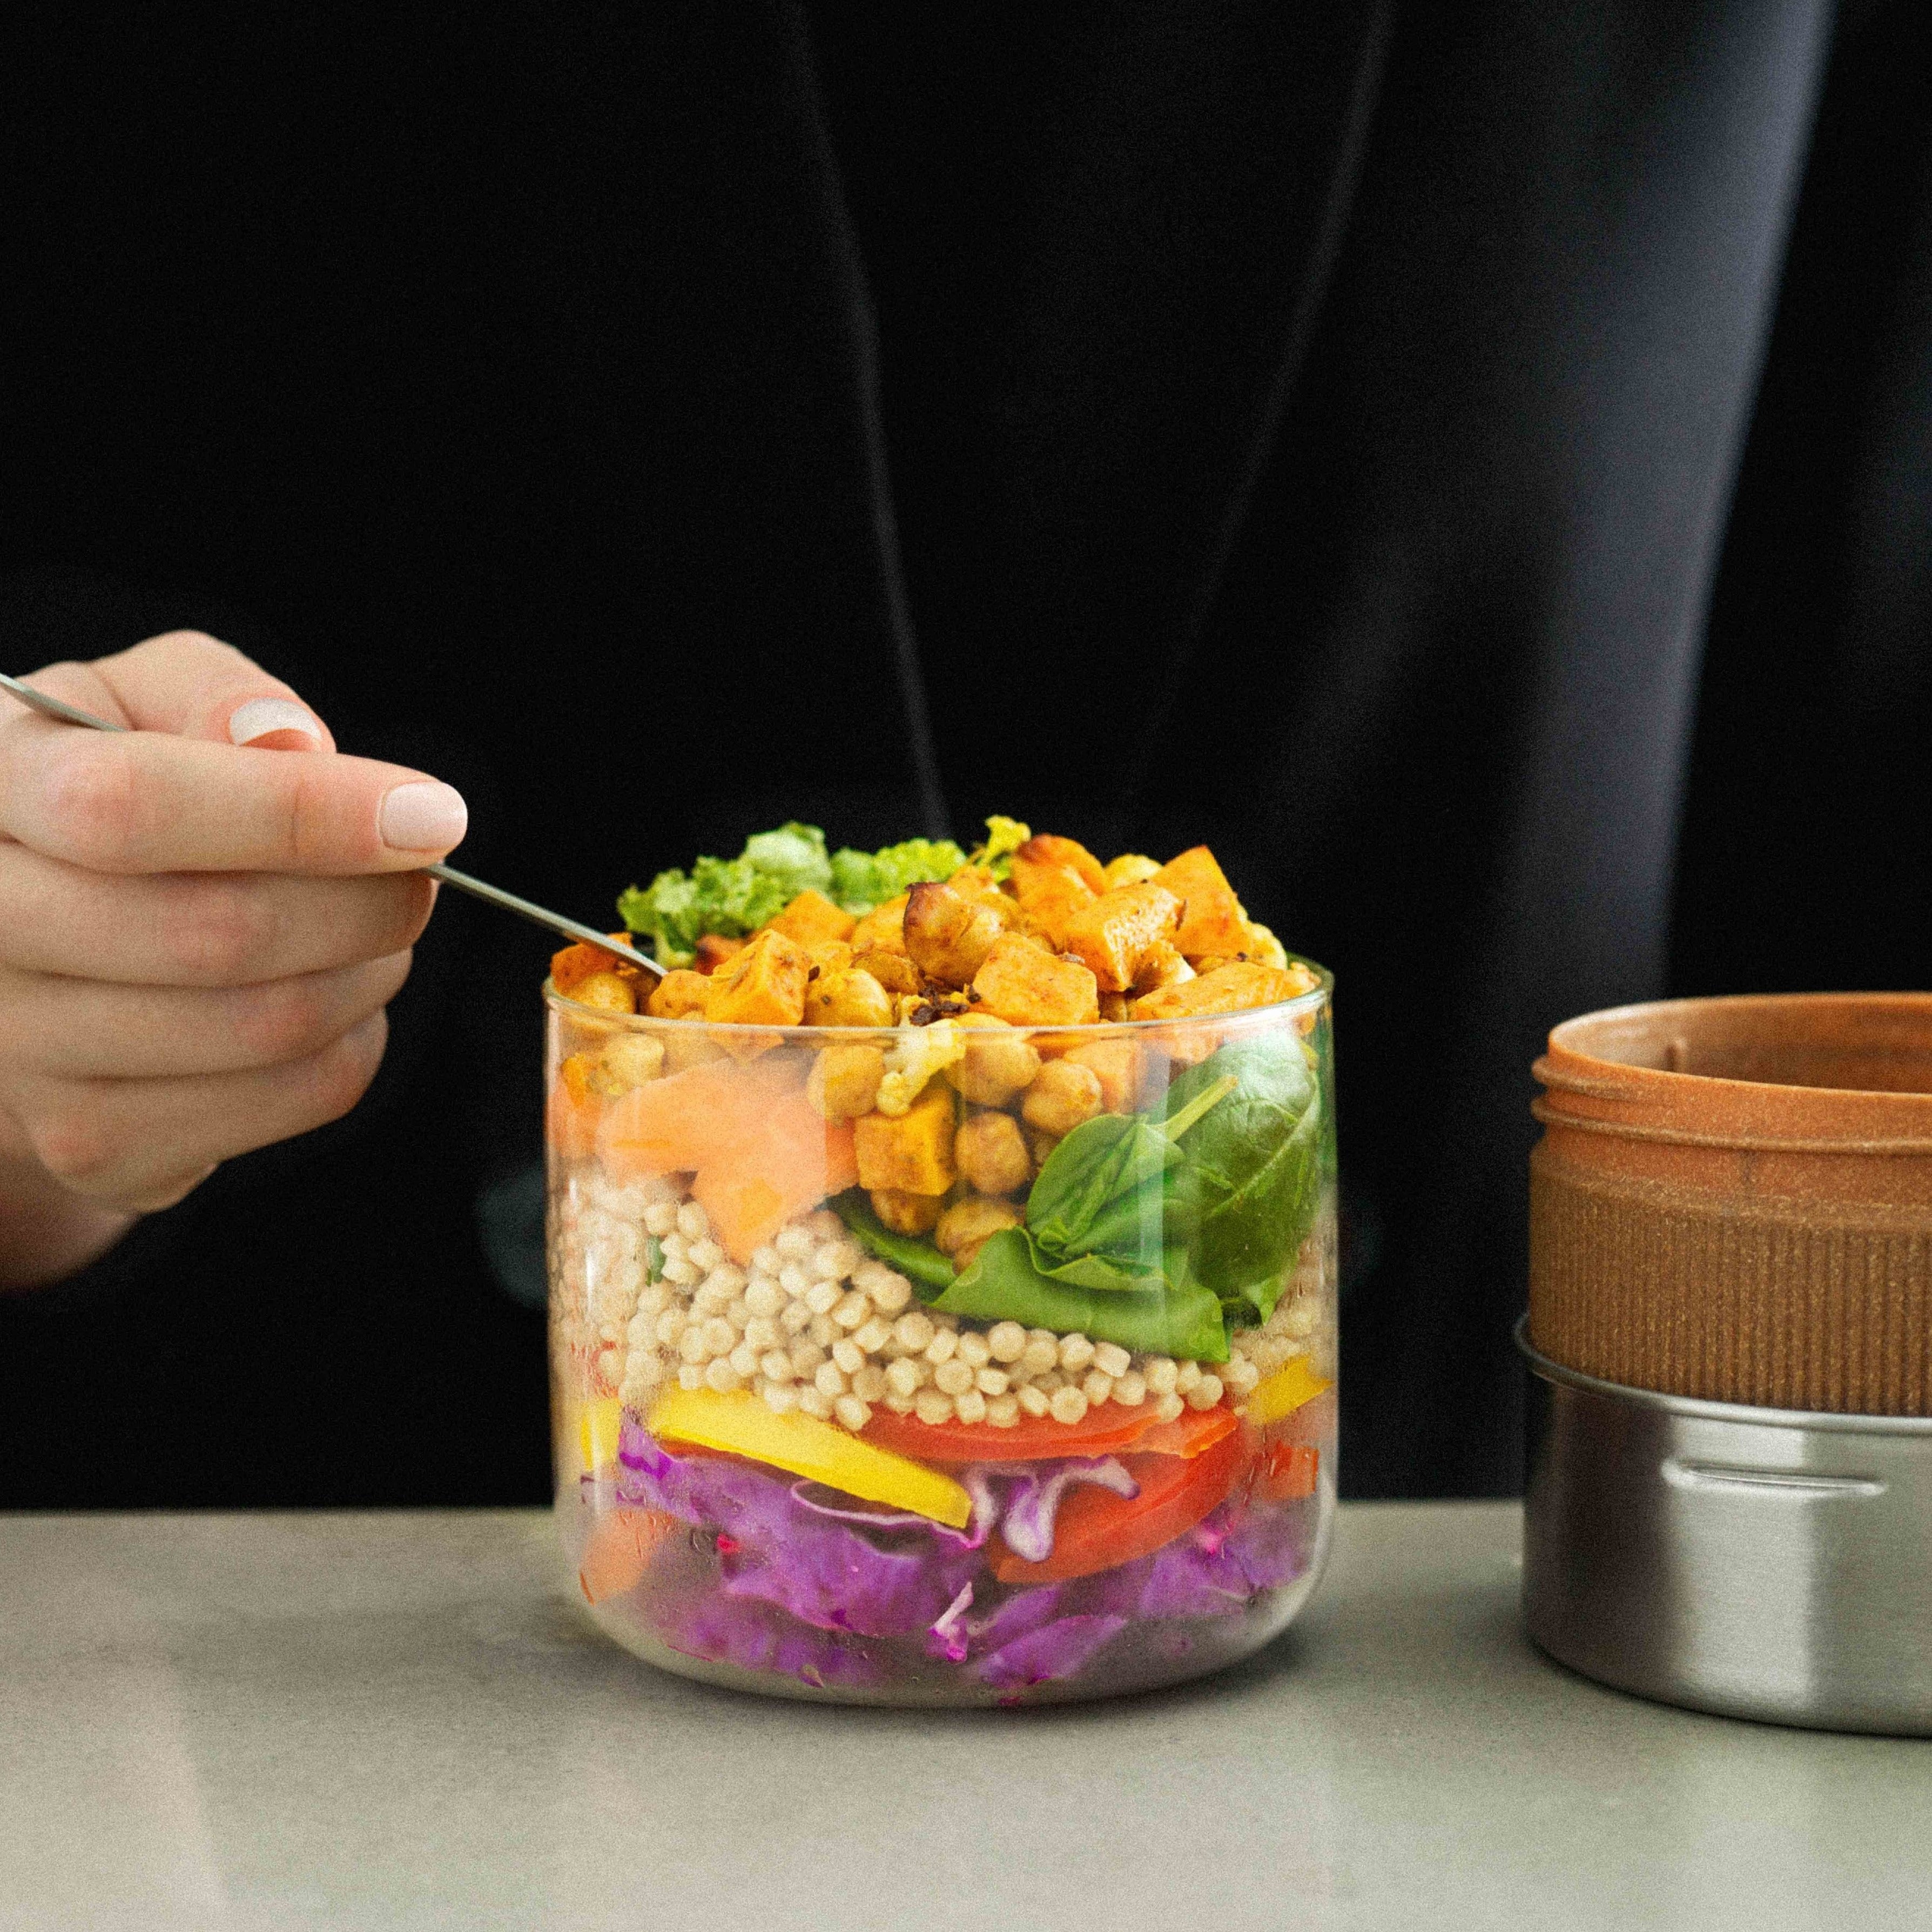 Black + Blum | Glass Lunch Pot Travel Food Storage Container - Large, Food Container, Black + Blum, Defiance Outdoor Gear Co.